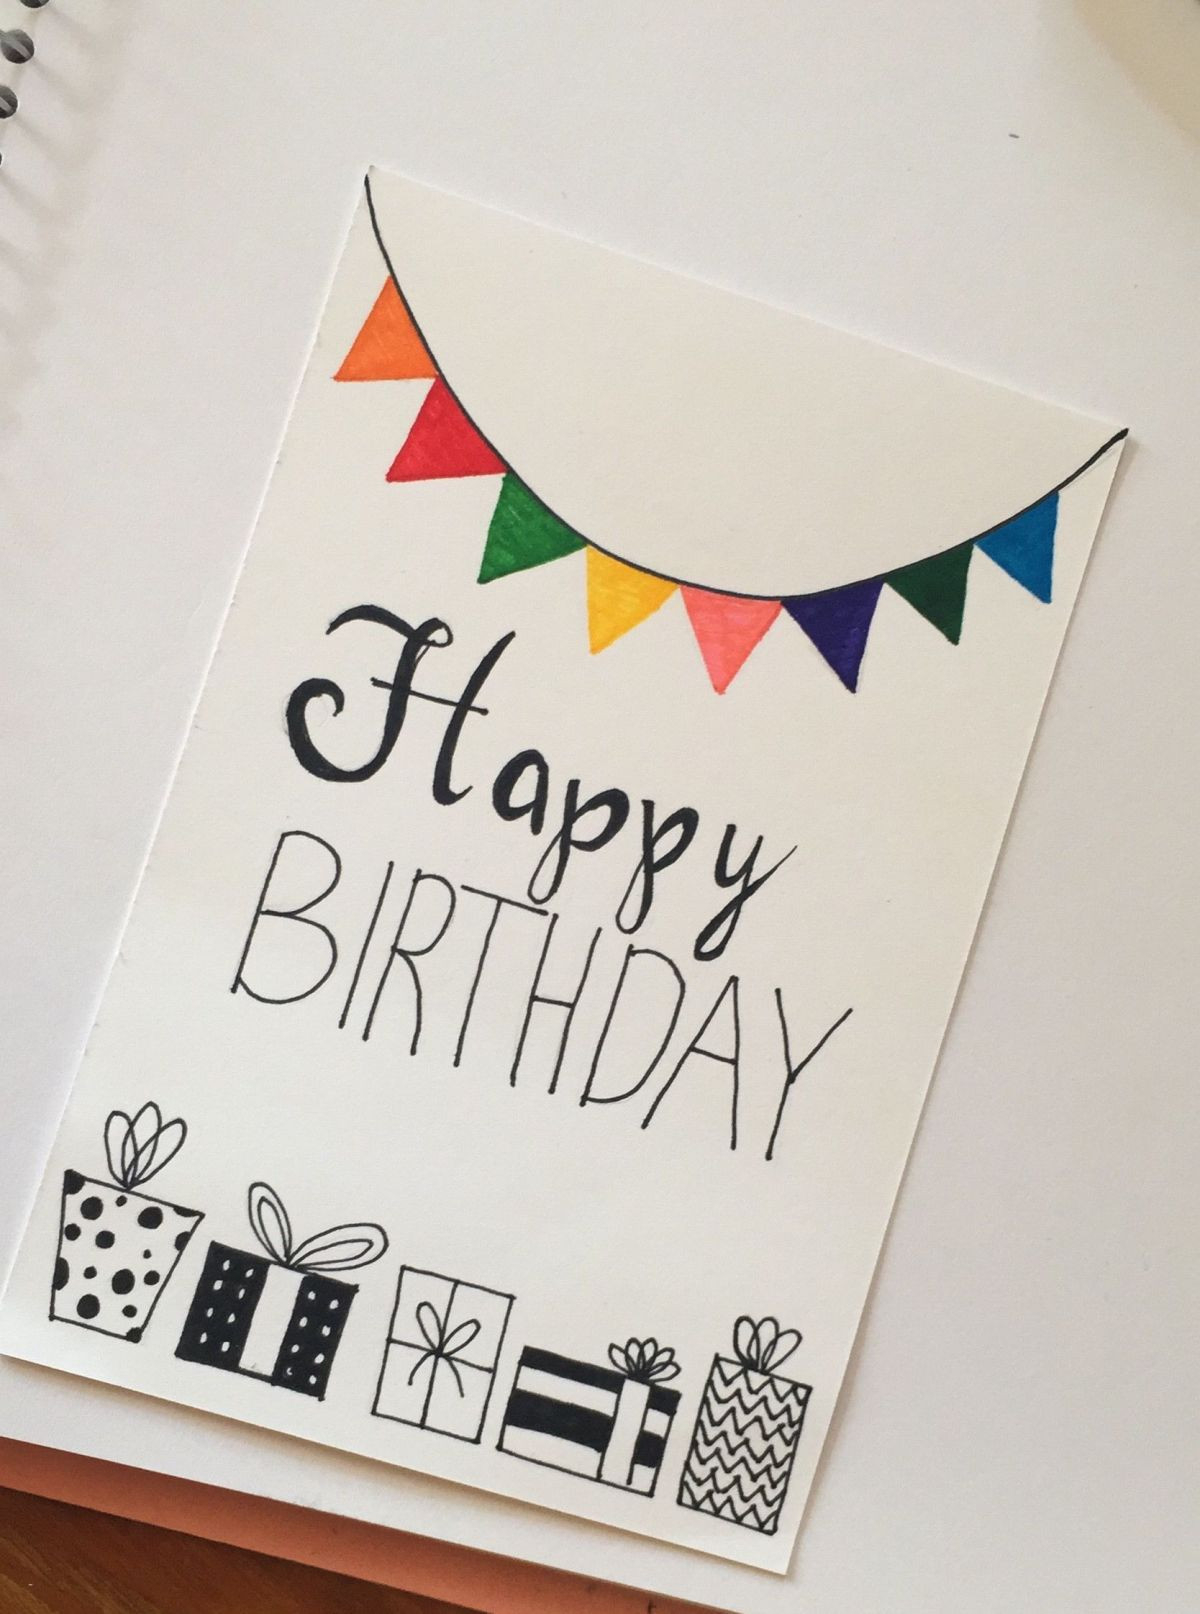 Cute Birthday Card Ideas Cute Birthday Card Ideas For Aunt Beautiful Messages An What To